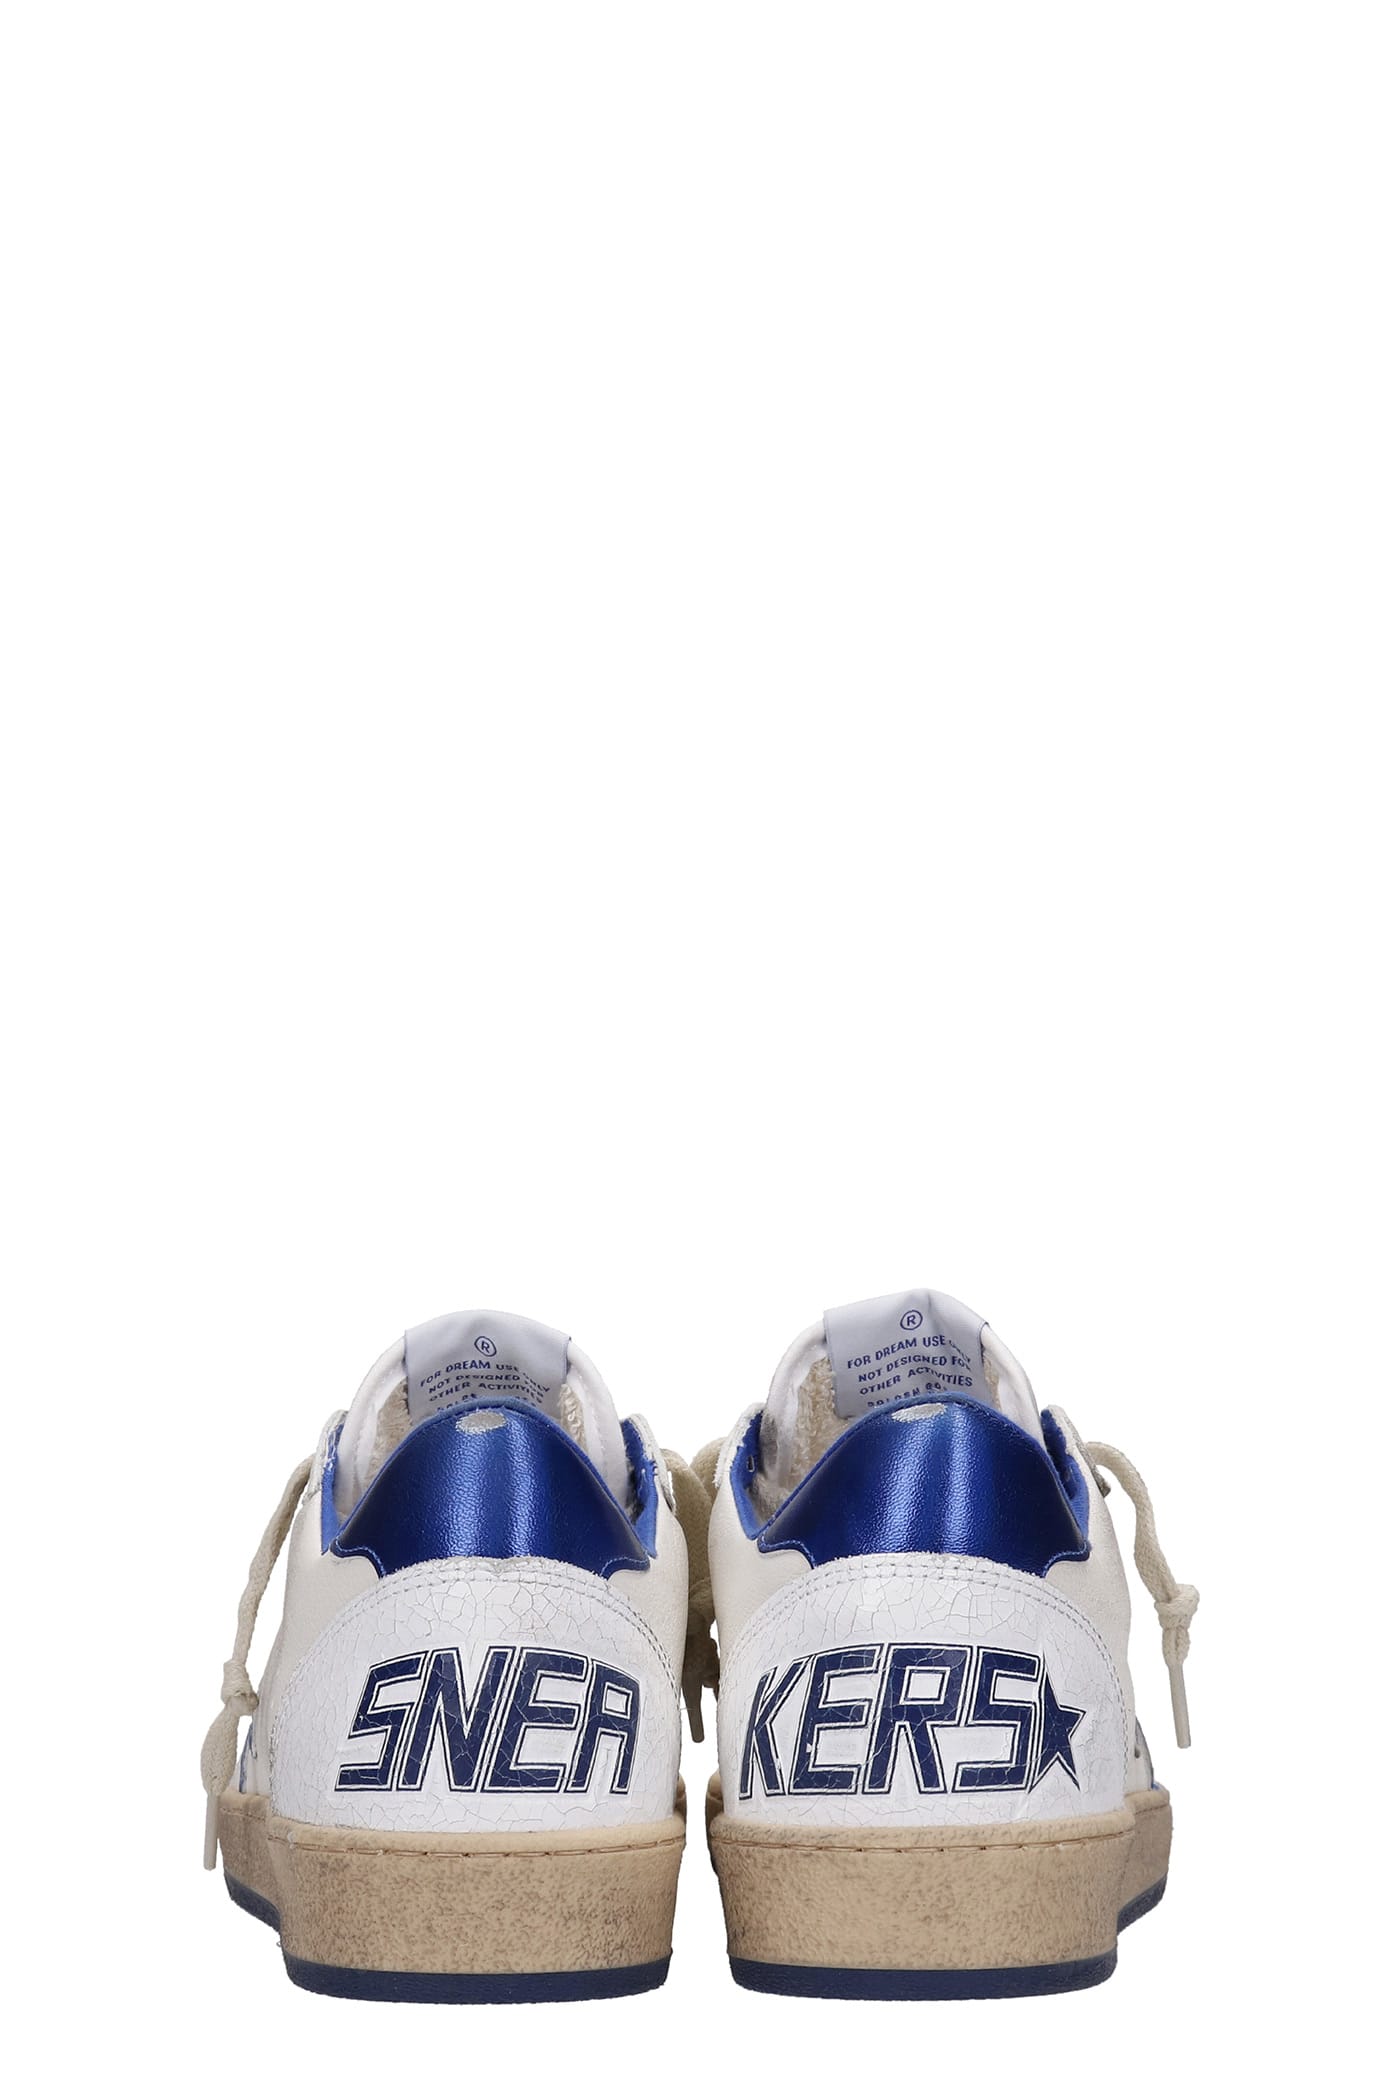 Shop Golden Goose Ball Star Sneakers In White Leather In Bianco